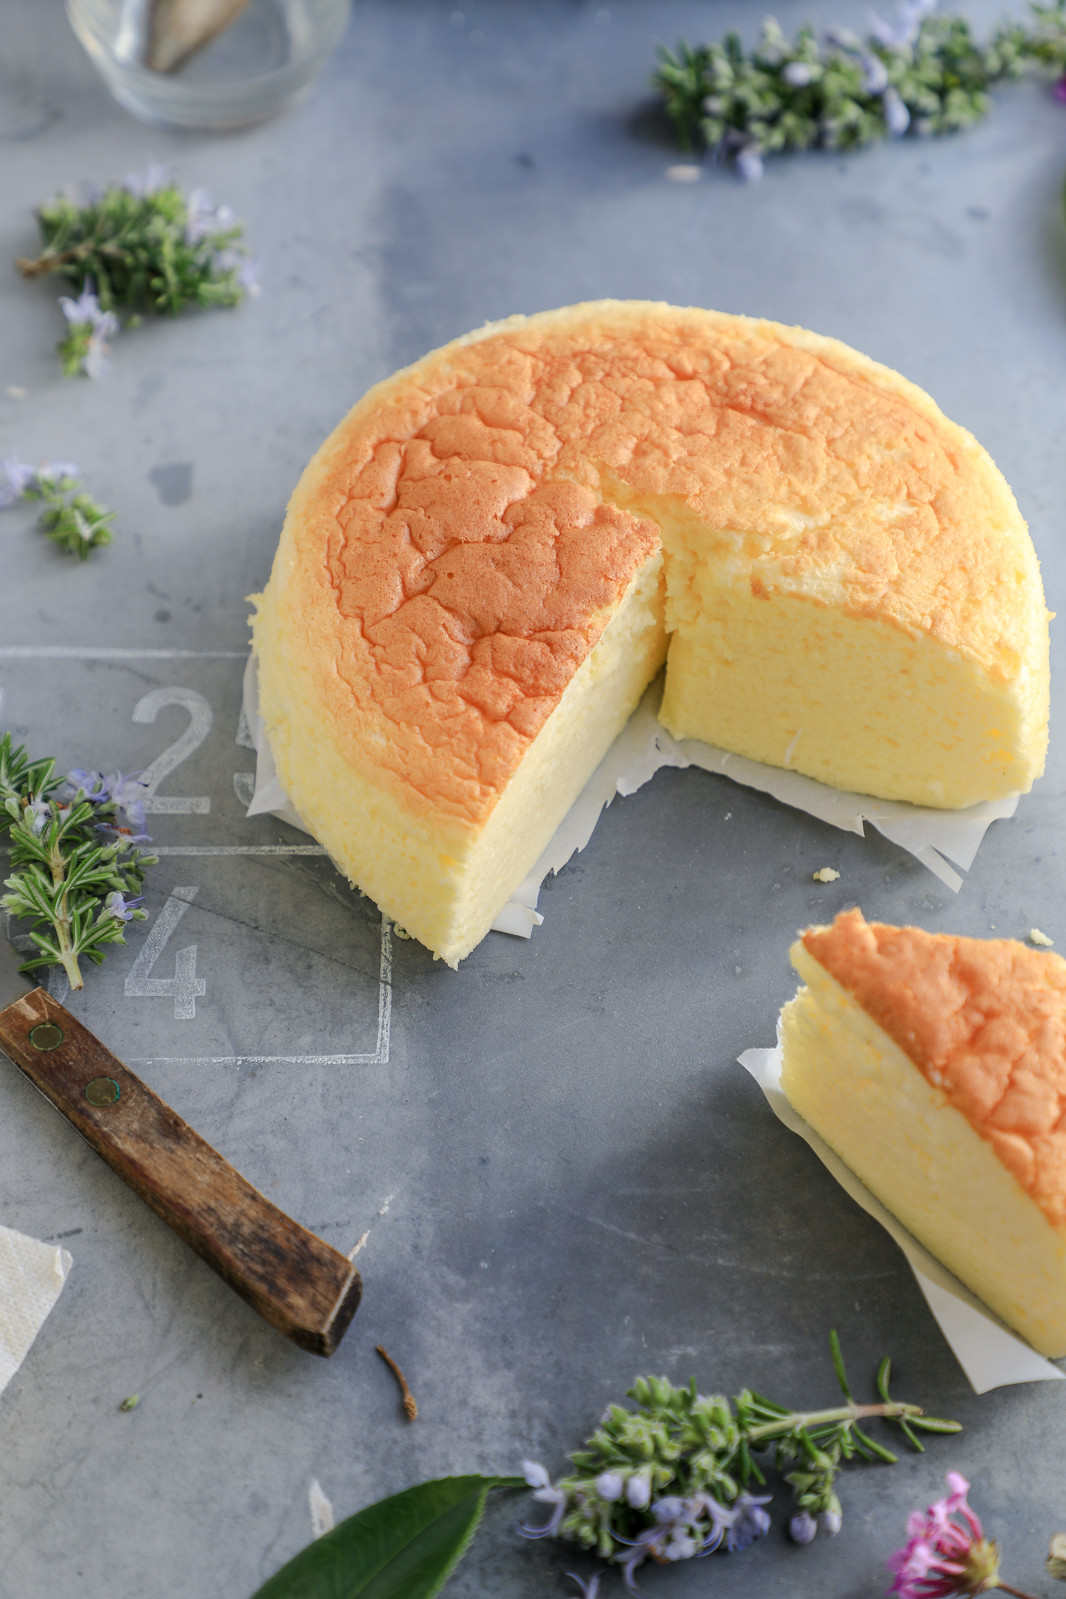 Japanese Fluffy Cheesecake Recipe Elegant Fluffy and Light Japanese Cheesecake Simple but Yum